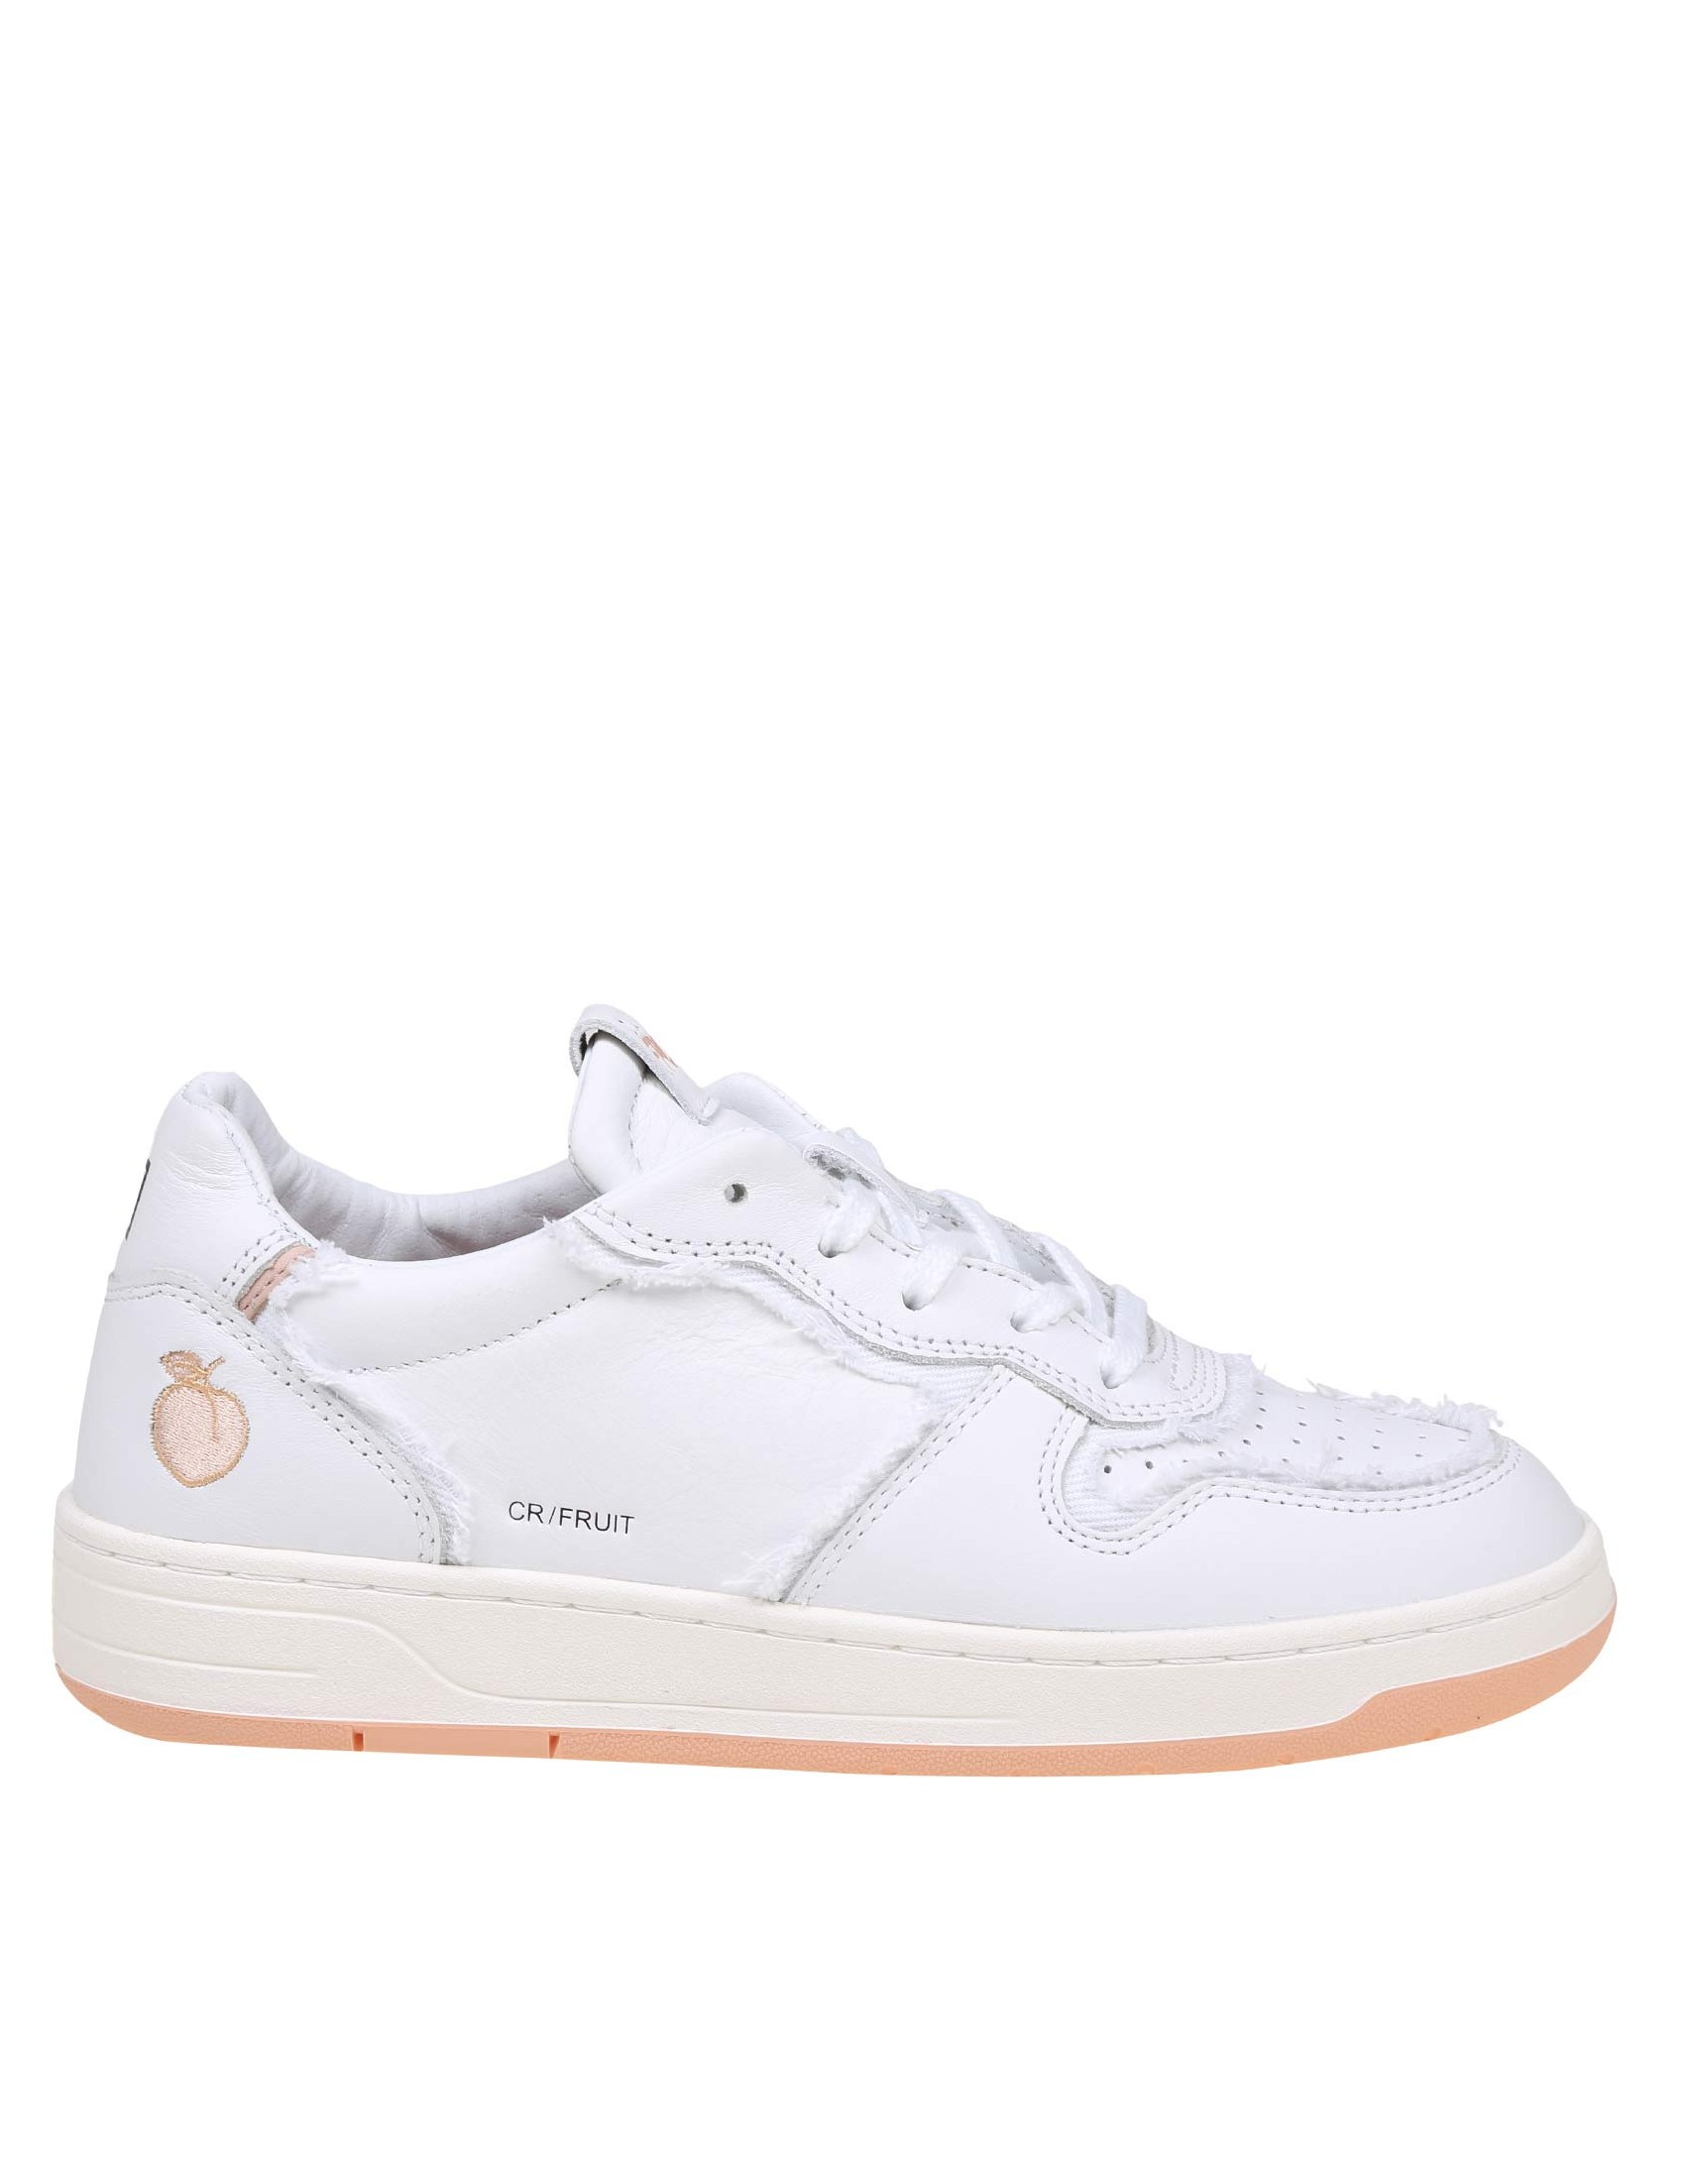 D.A.T.E. SNEAKERS COURT IN PELLE COLORE BIANCO